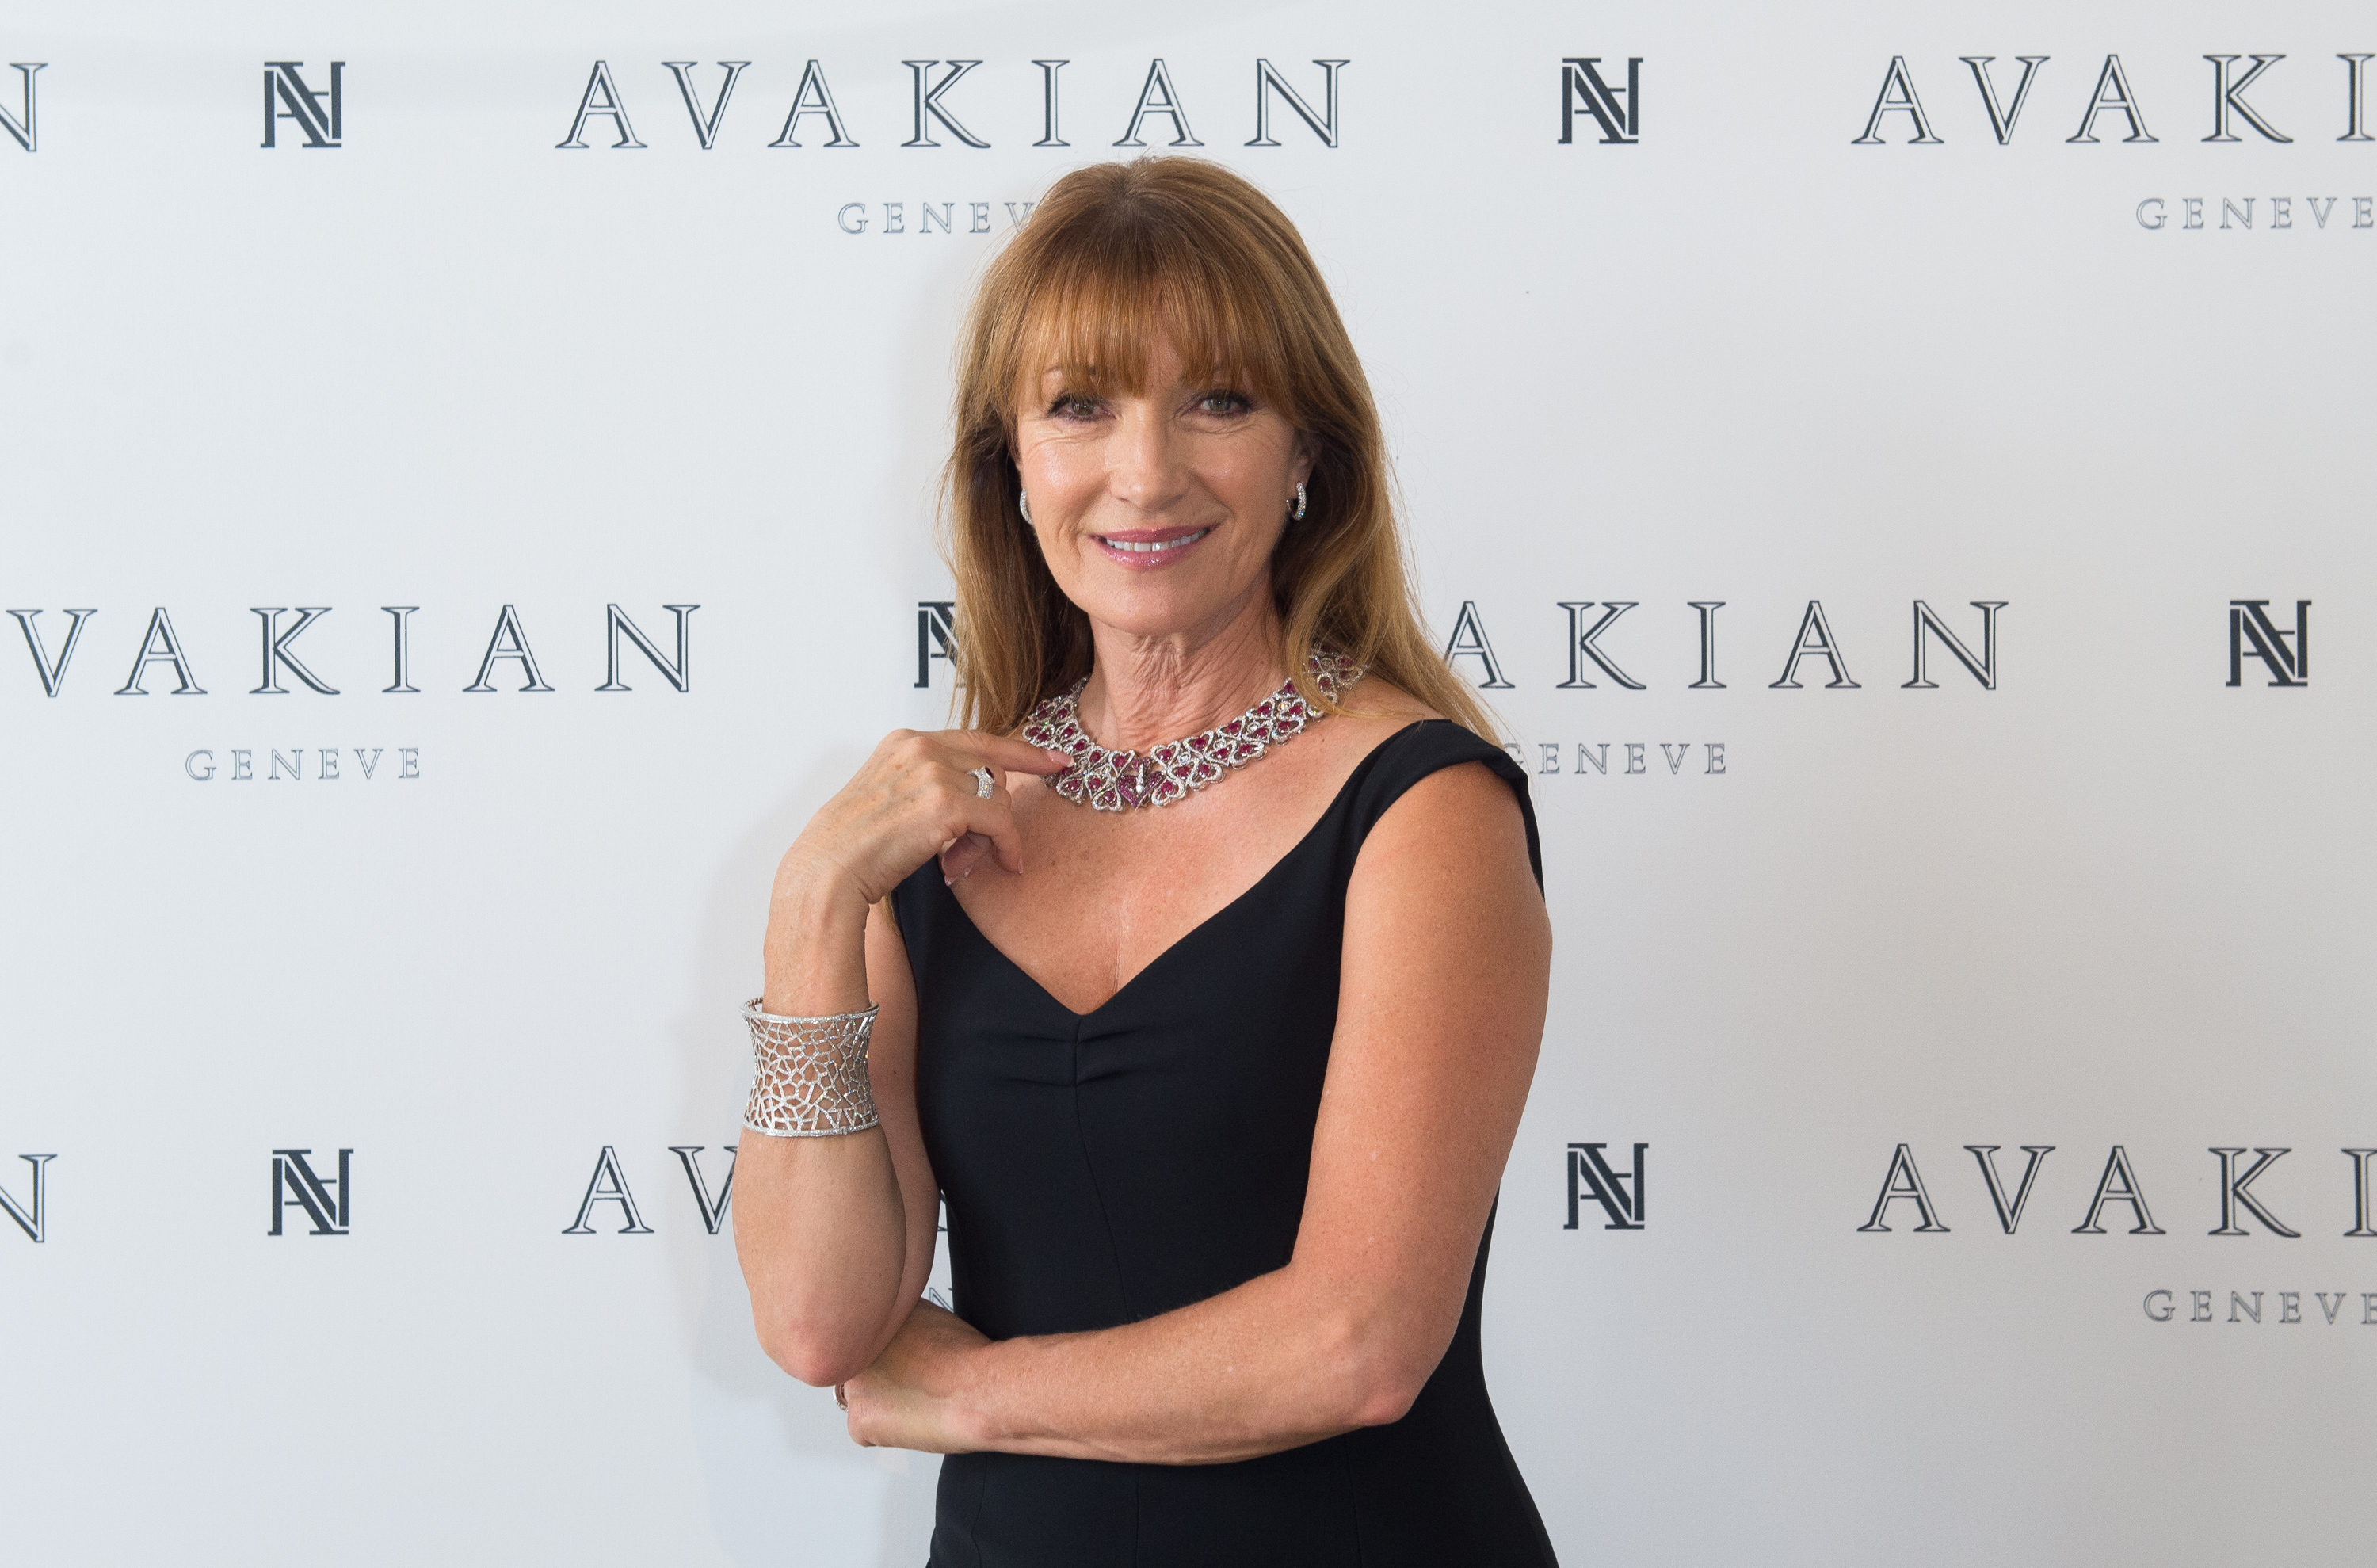 Jane Seymour visits The Avakian Suite during The 68th Annual Cannes Film Festival at the Carlton Hotel in Cannes, France, on May 14, 2015. | Source: Getty Images